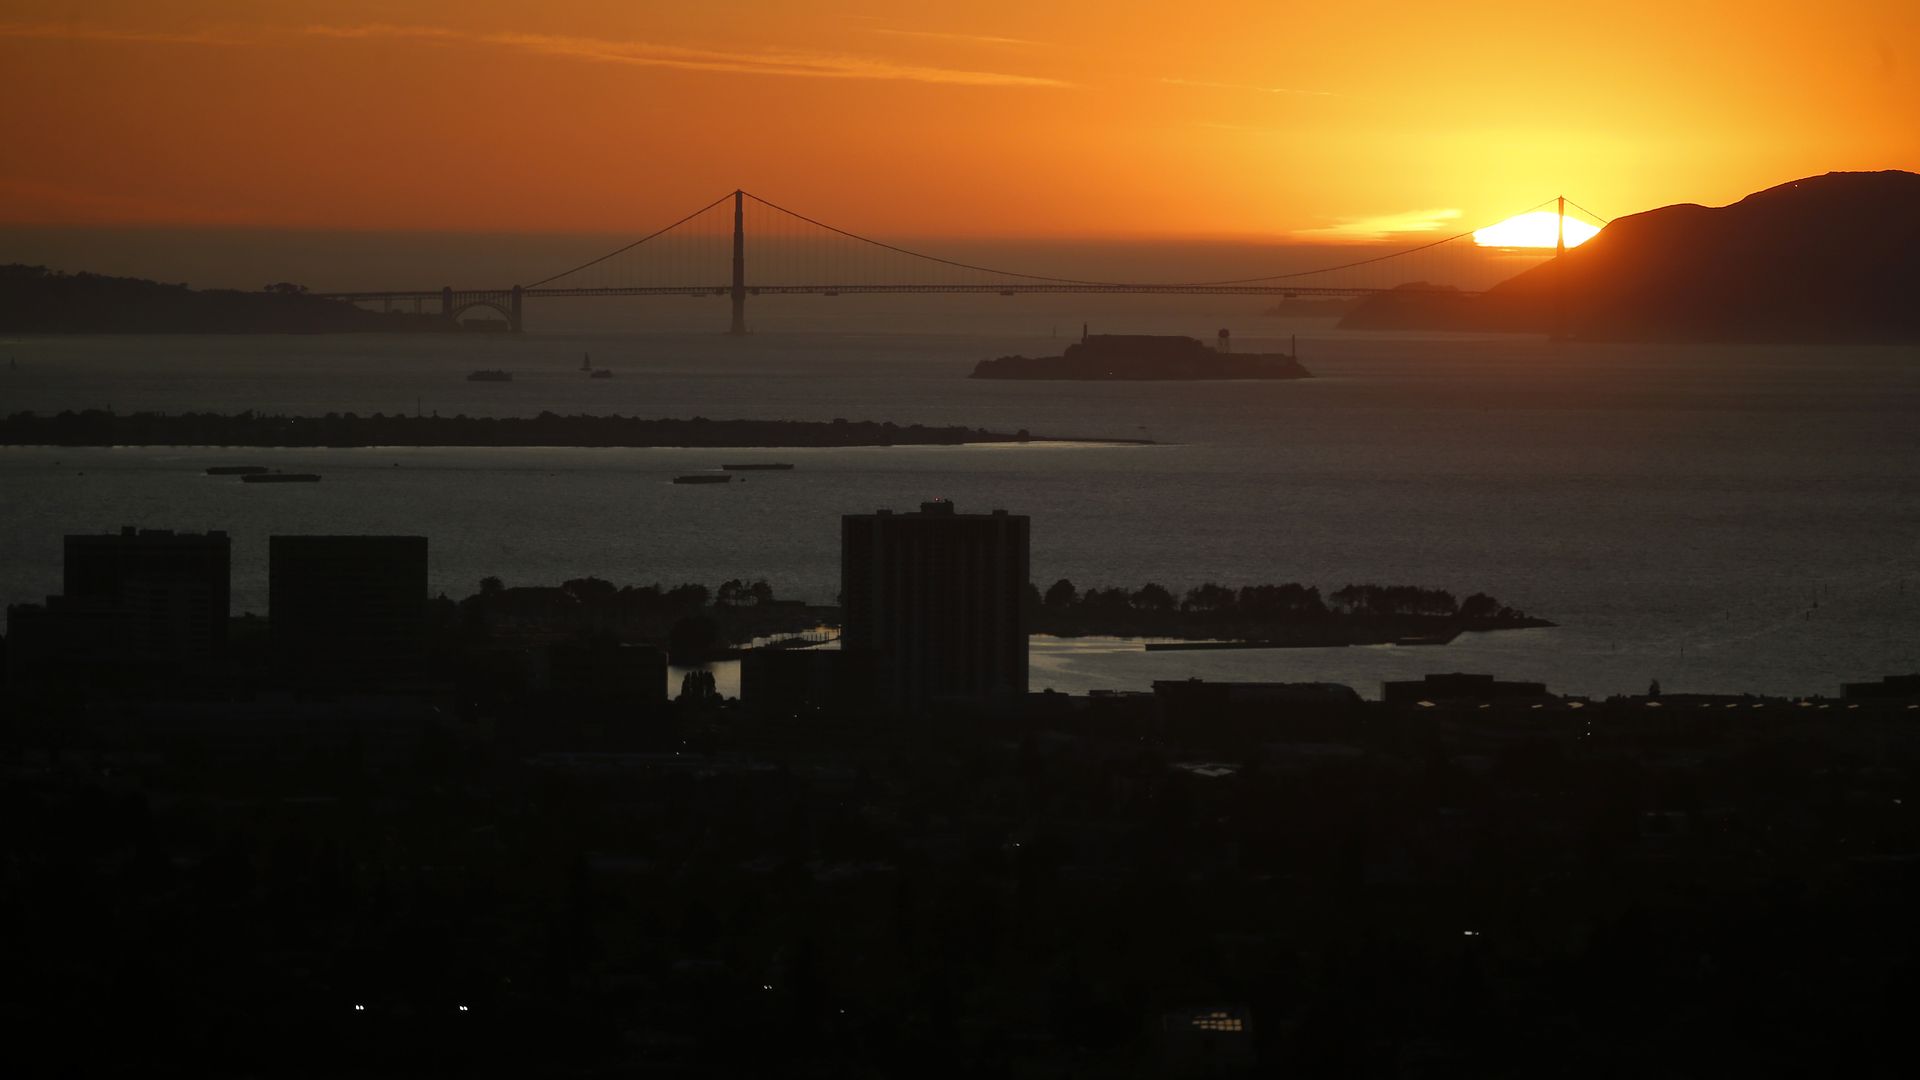 This image shows a dark San Francisco skyline during a sunset, with the darkened Golden Gate bridge in the distance